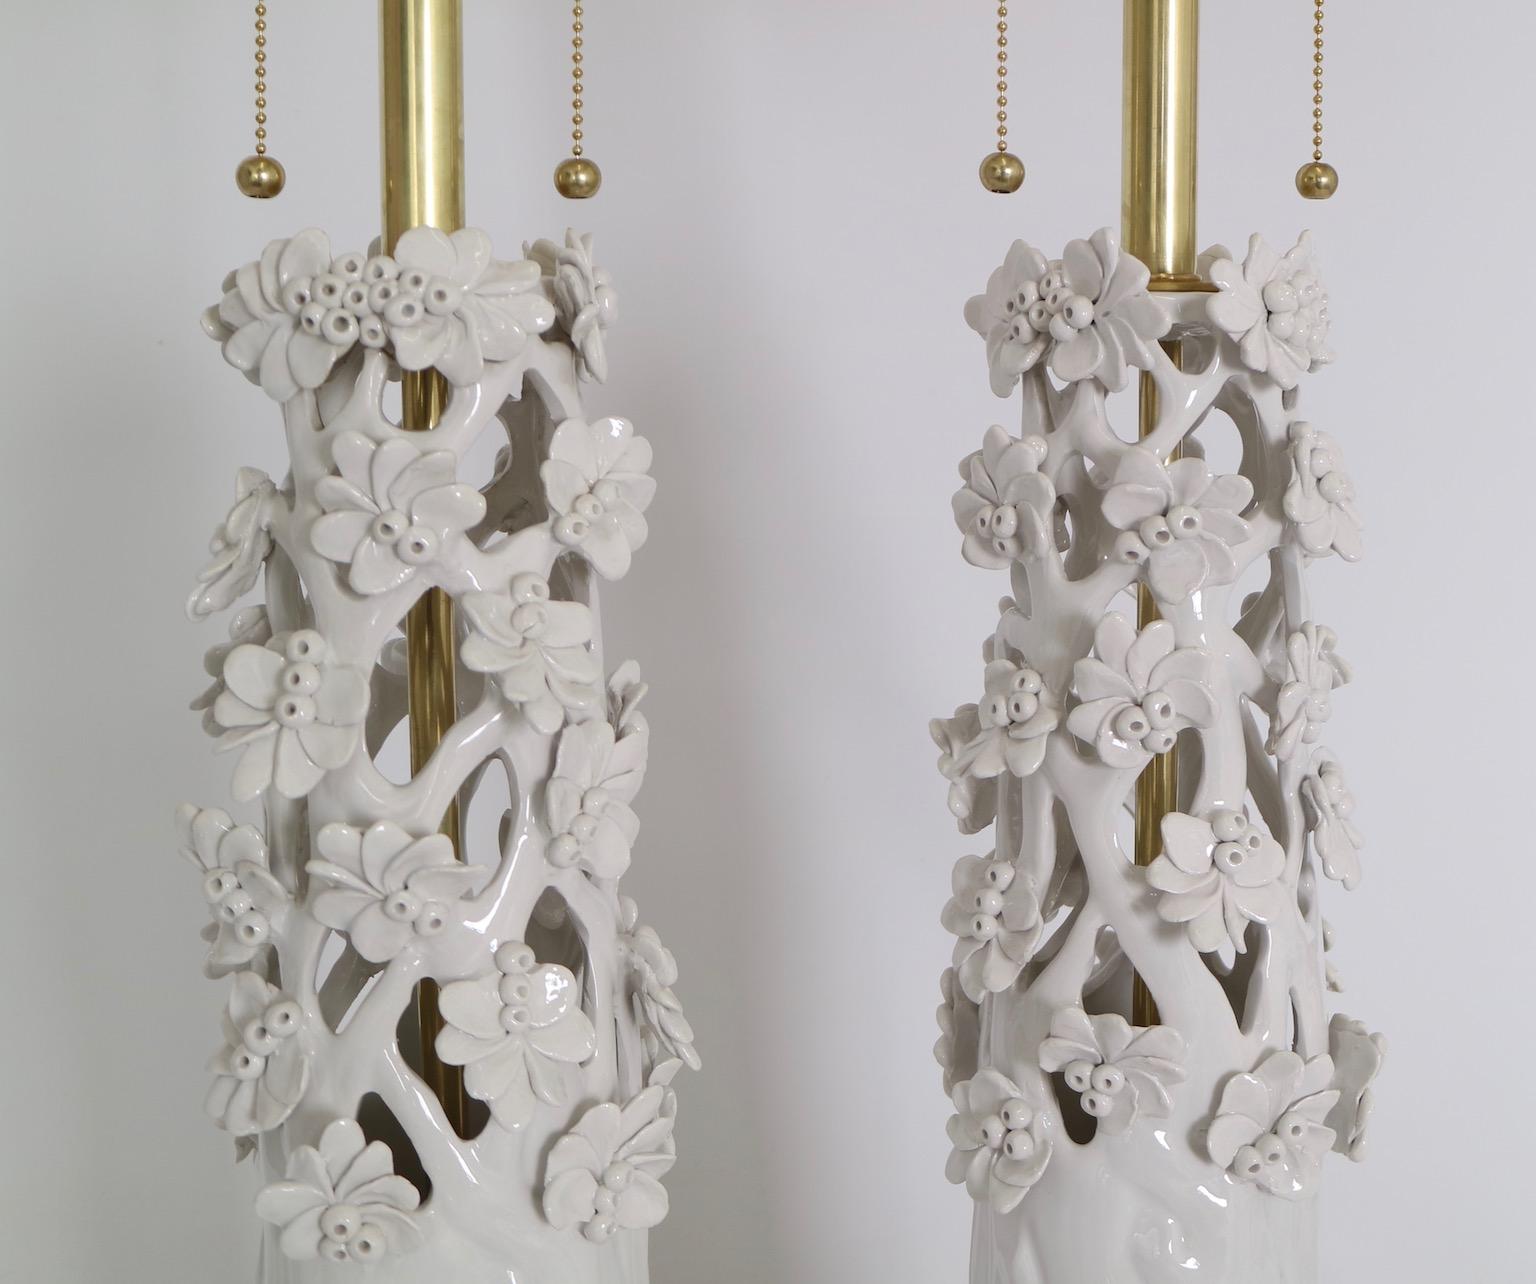 Italian Marbro Lamp Co. Hollywood Regency White Ceramic Lamps with Sculptural Flowers